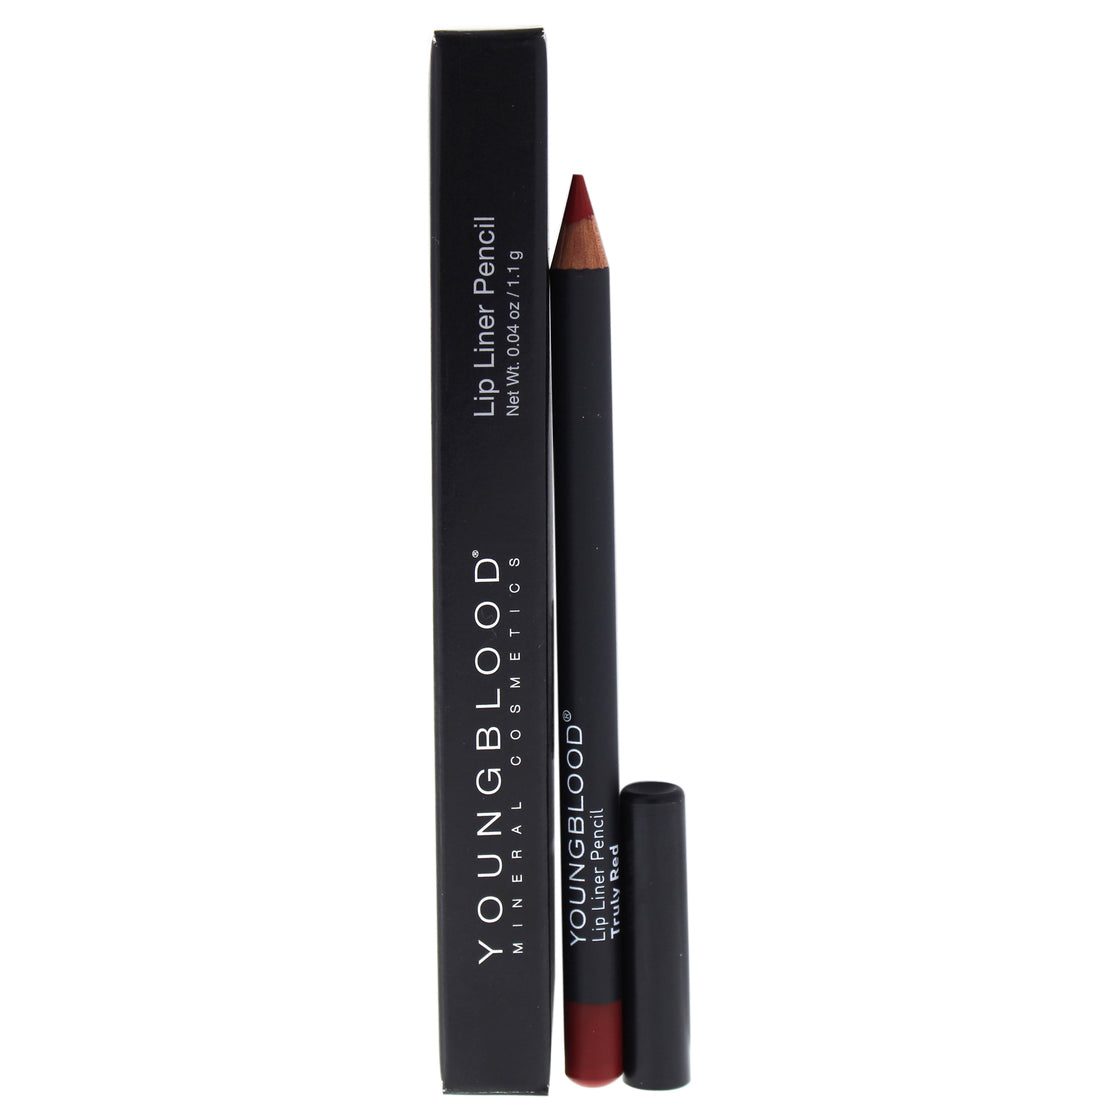 Lip Liner Pencil - Truly Red by Youngblood for Women - 0.04 oz Lip Liner